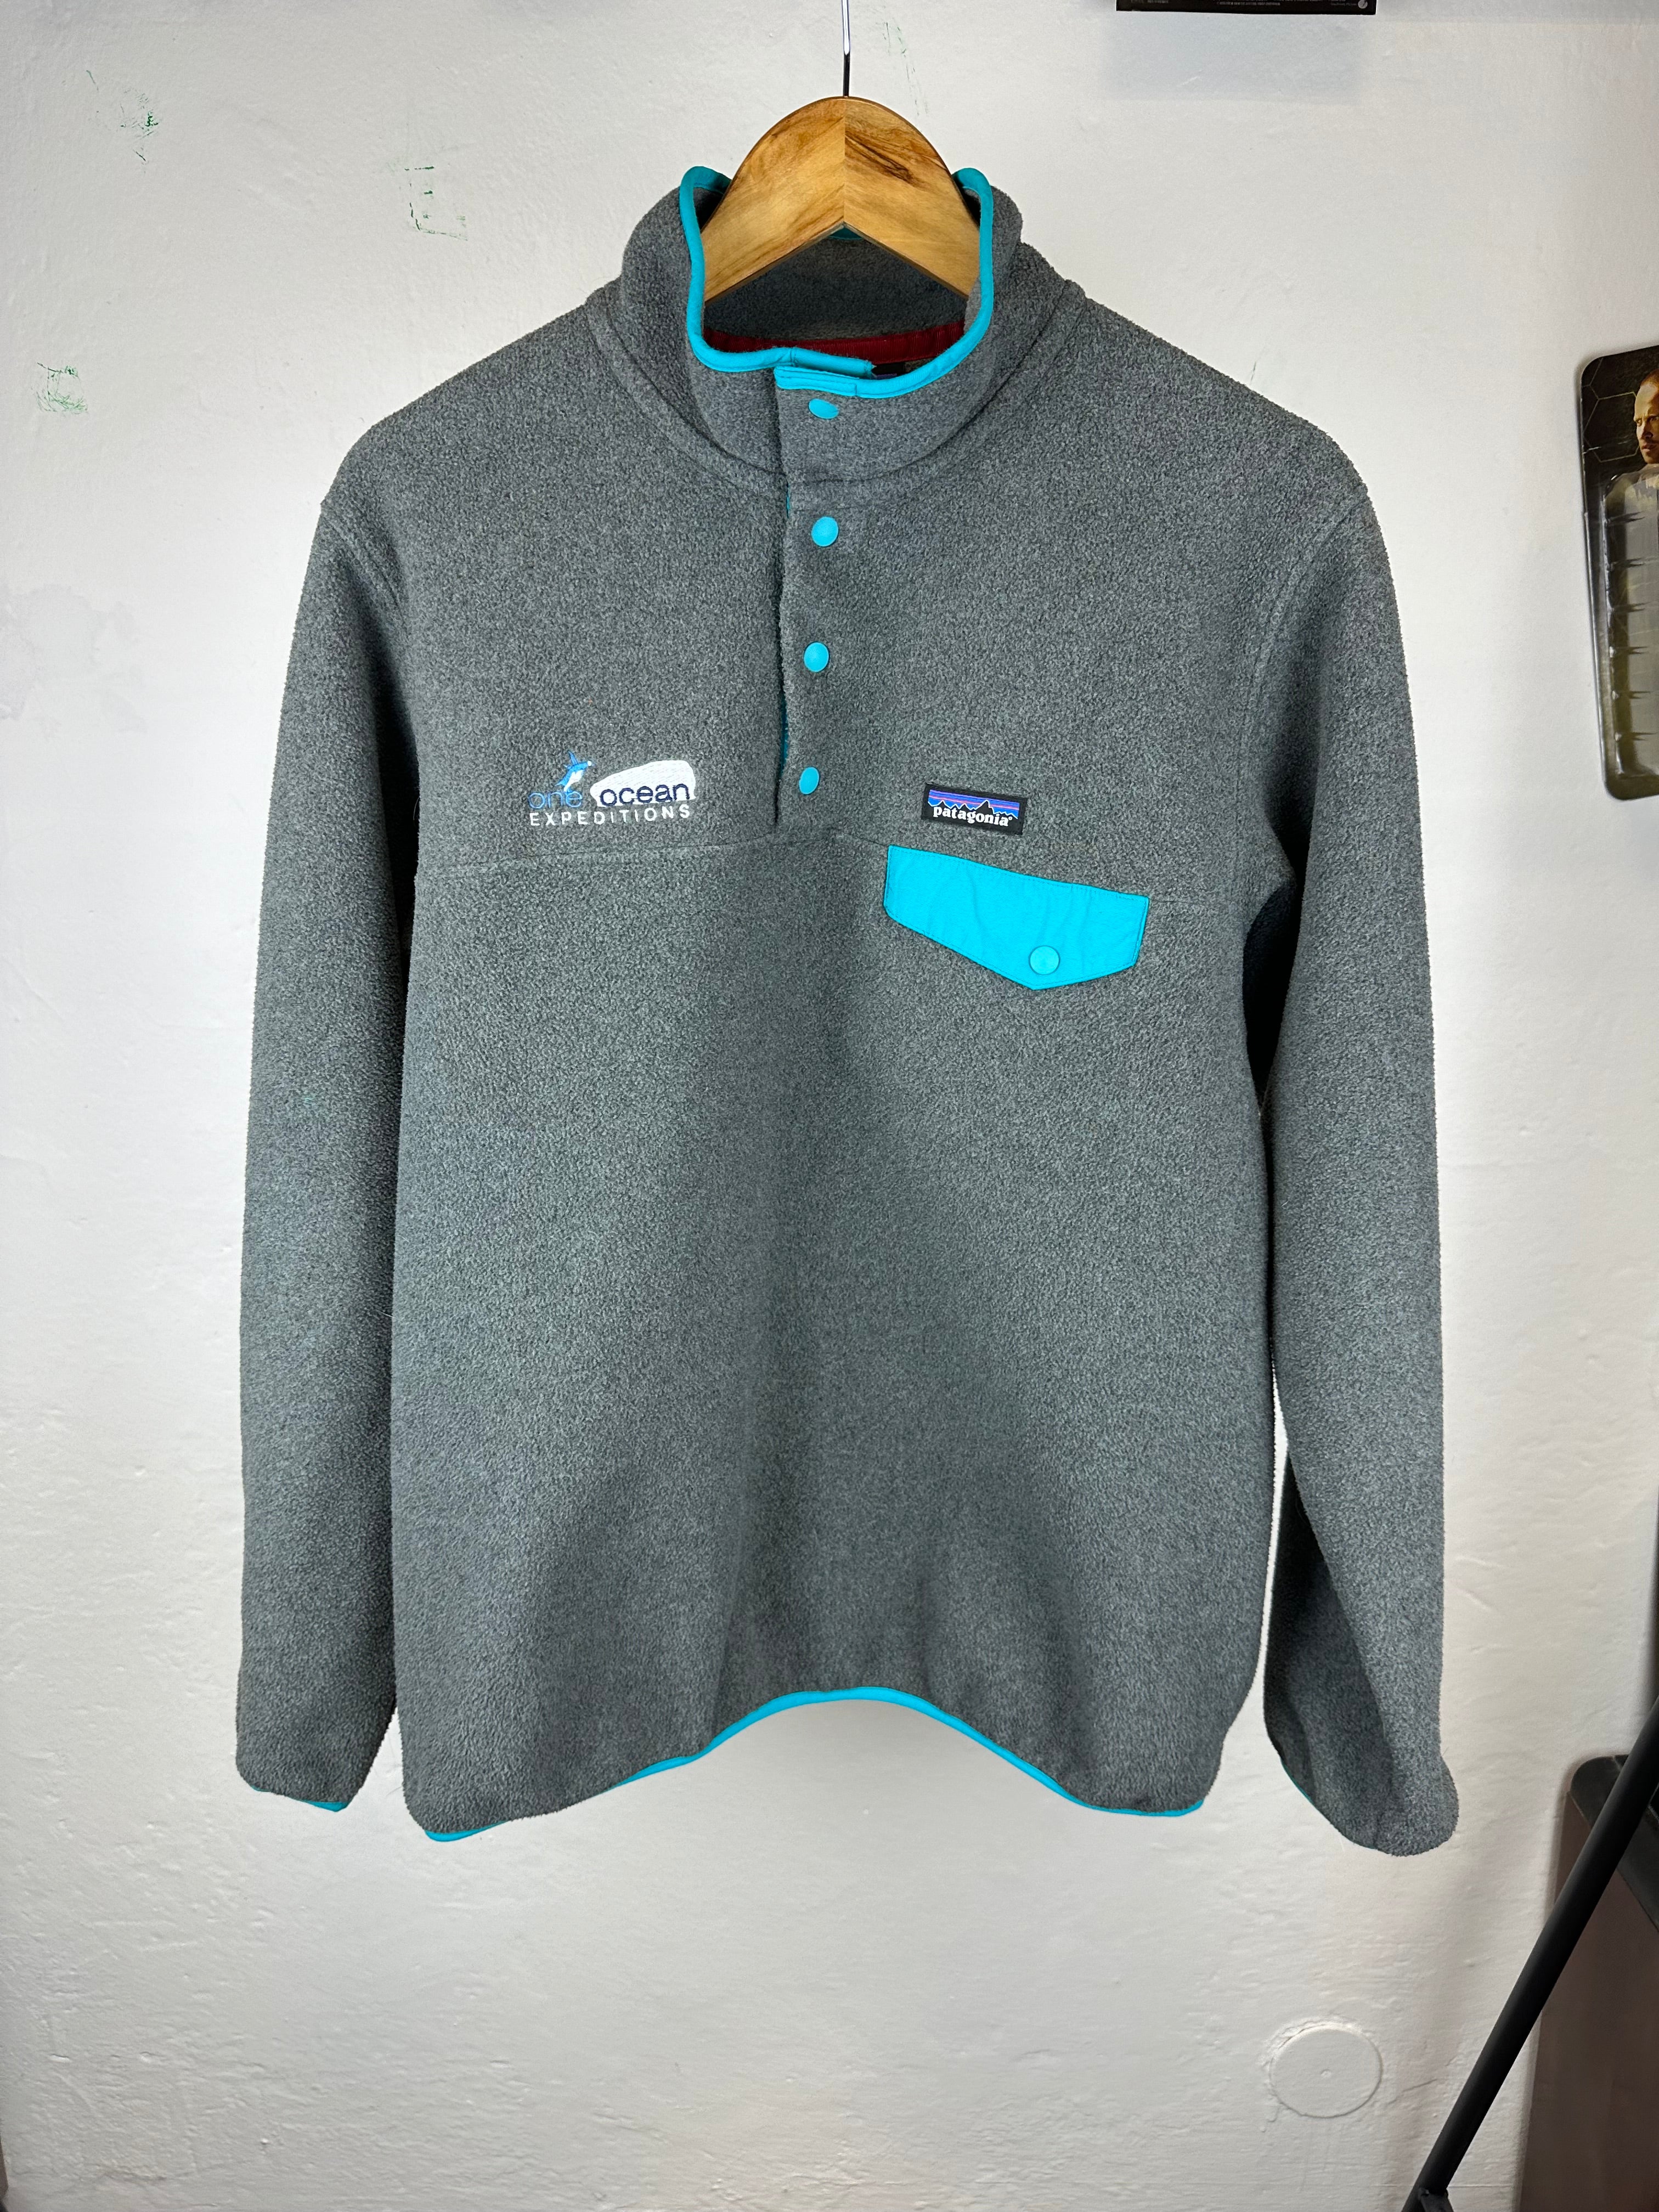 Vintage Patagonia “One Ocean Expeditions” Fleece - size L